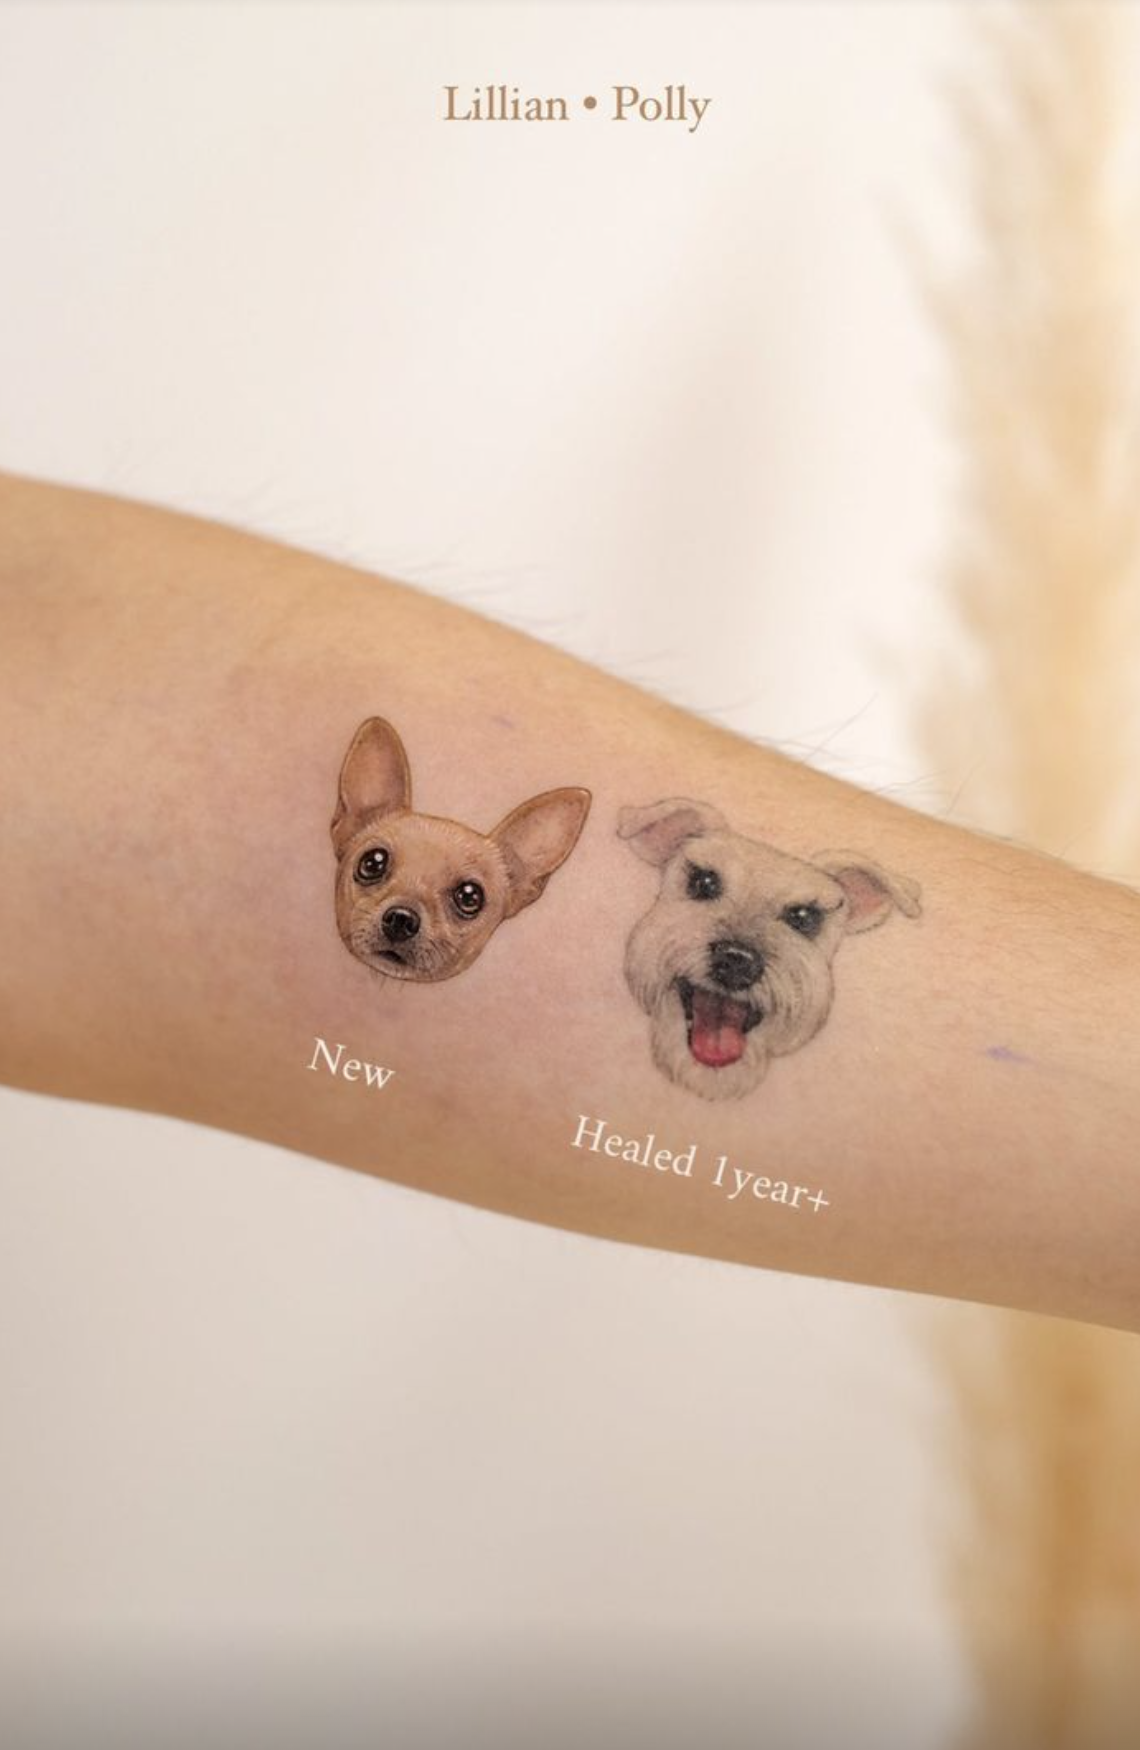 How to Get a Pet Tattoo You Won't Regret